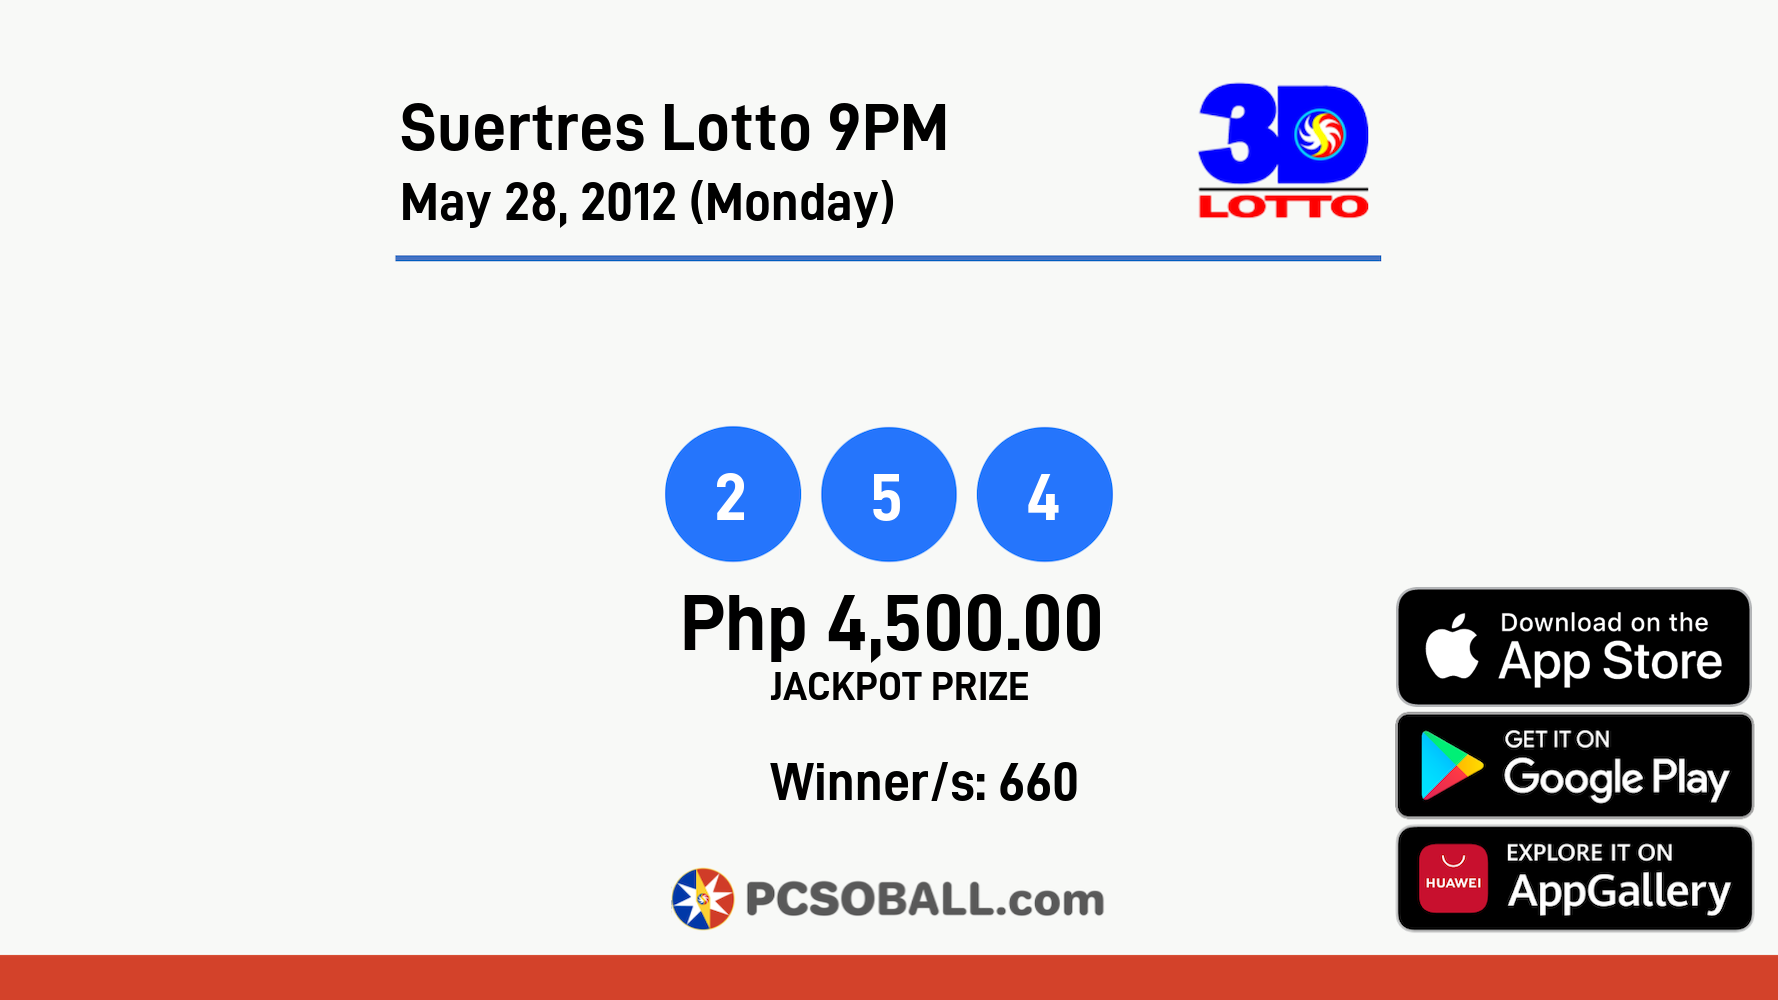 Suertres Lotto 9PM May 28, 2012 (Monday) Result